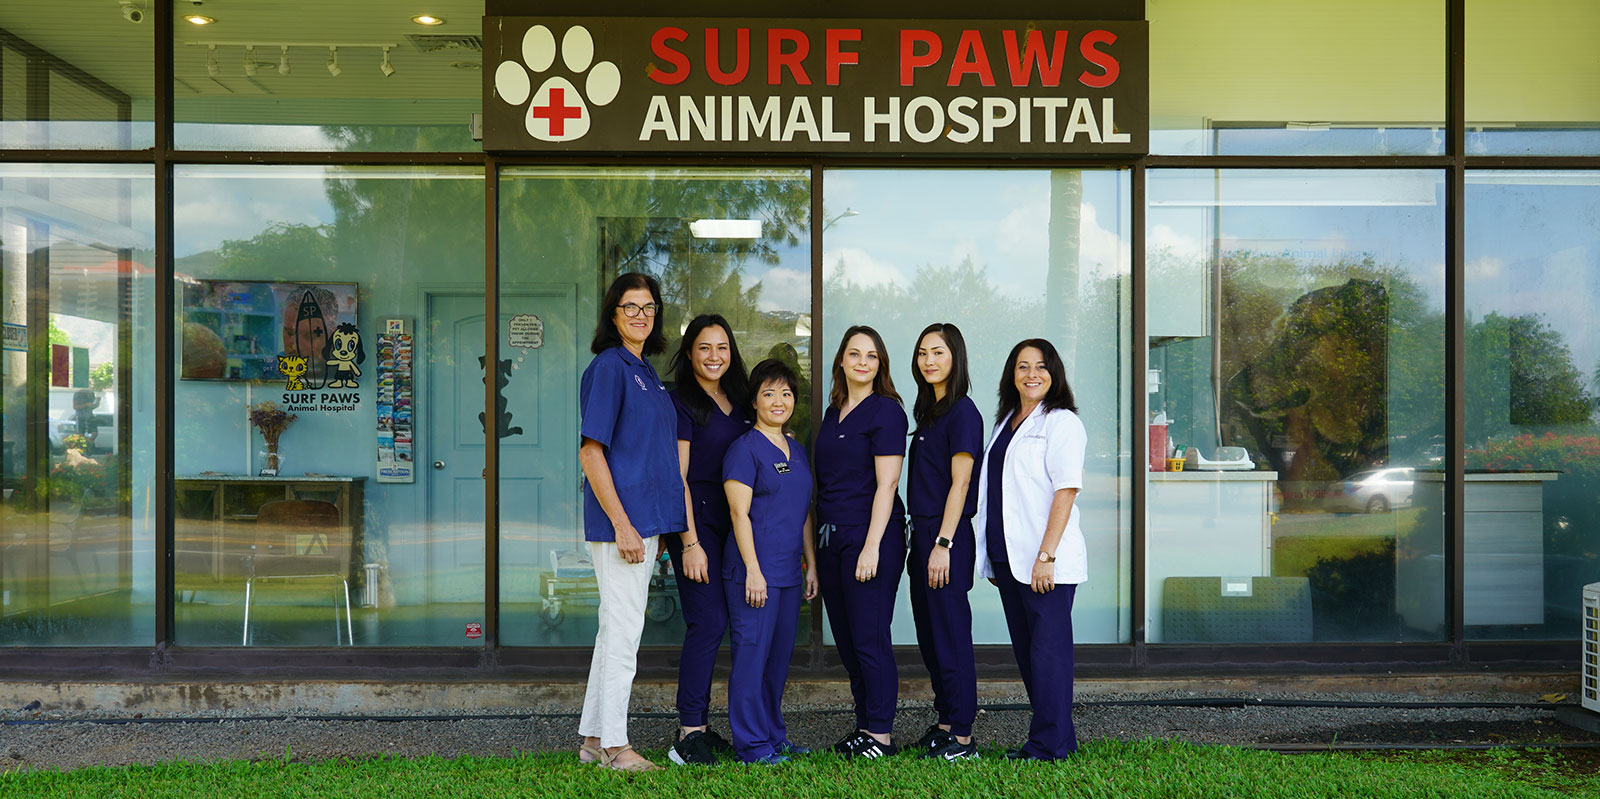 Surf Paws Animal Hospital – Keeping Your Pets Healthy and Active